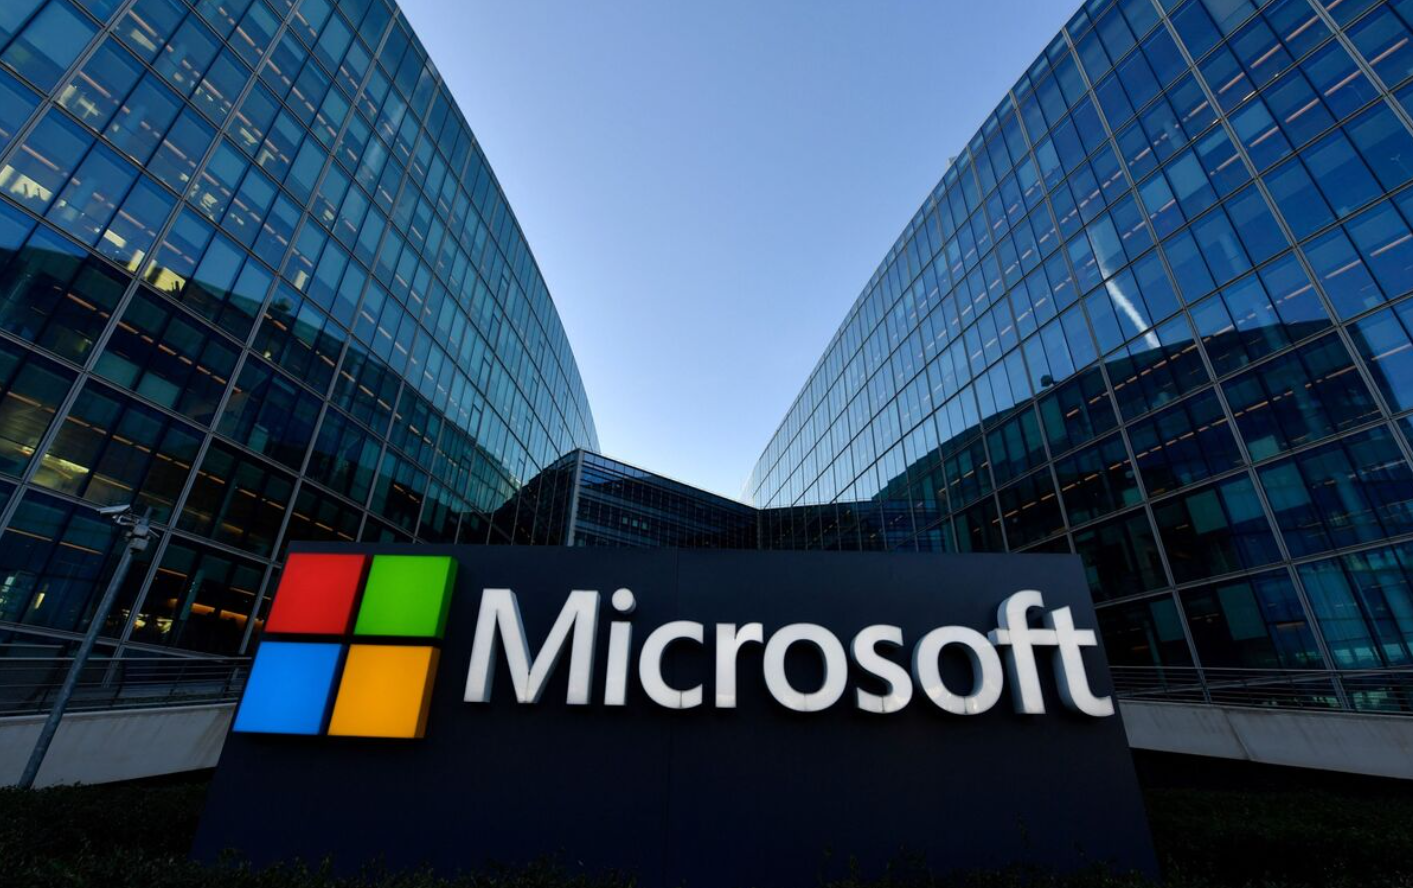 Microsoft Gains Ground On Apple In Market Value Race